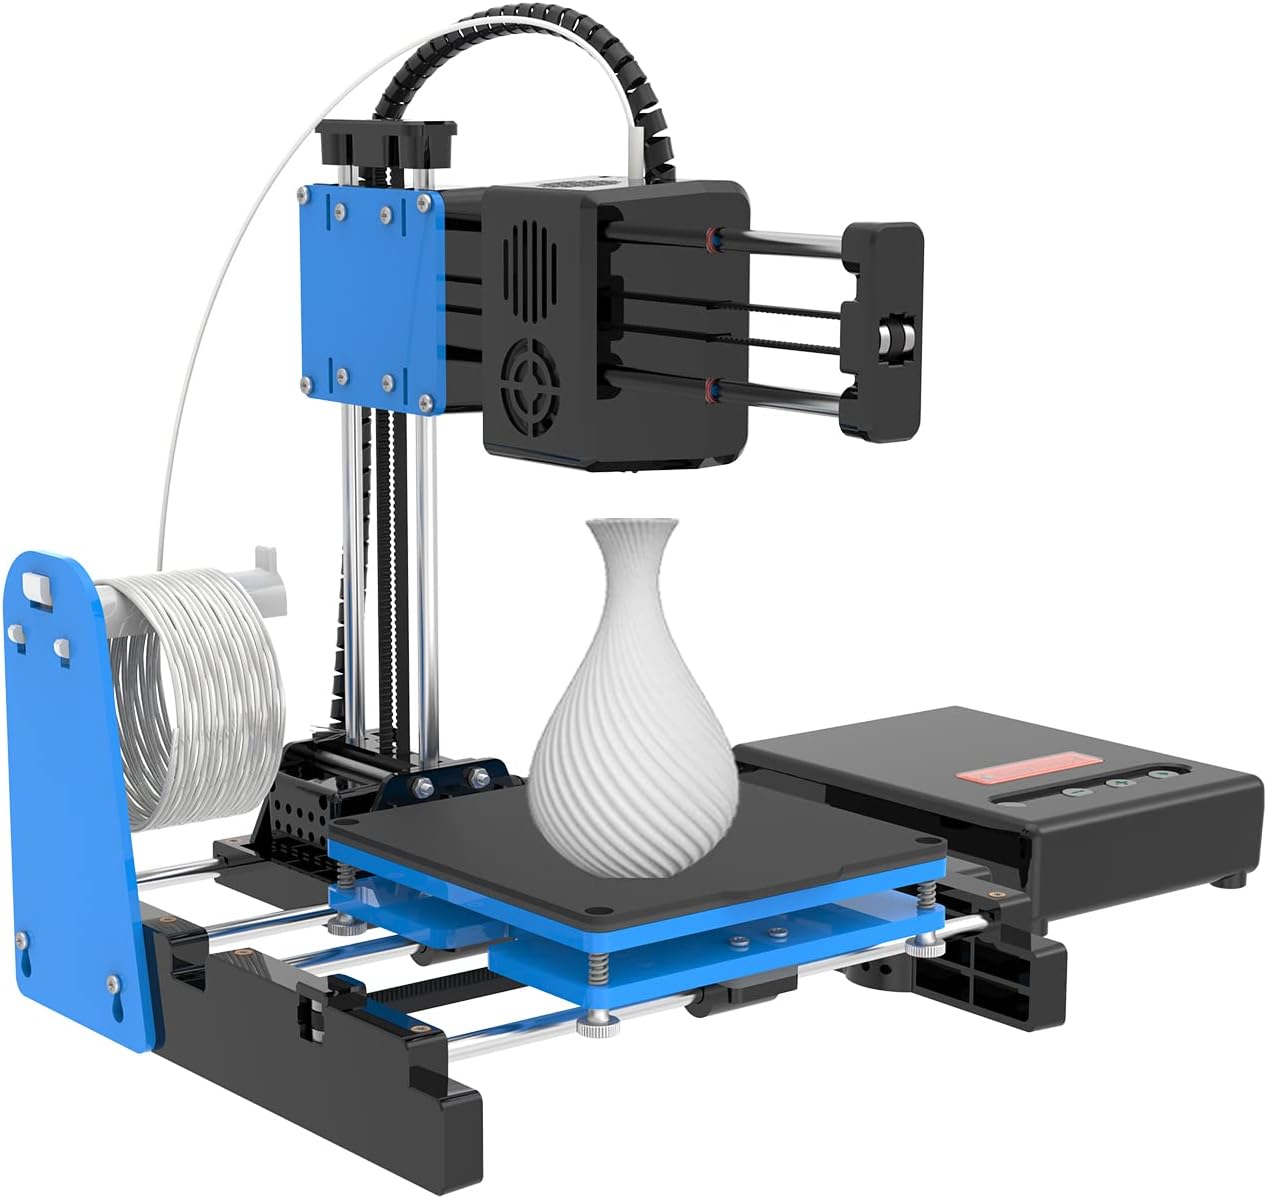 x1-fdm-mini-3d-printer-for-beginners-your-first-entry-level-3d-printer-high-printing-accuracy-new-upgraded-extruder-tech X1 FDM Mini 3D Printer Review